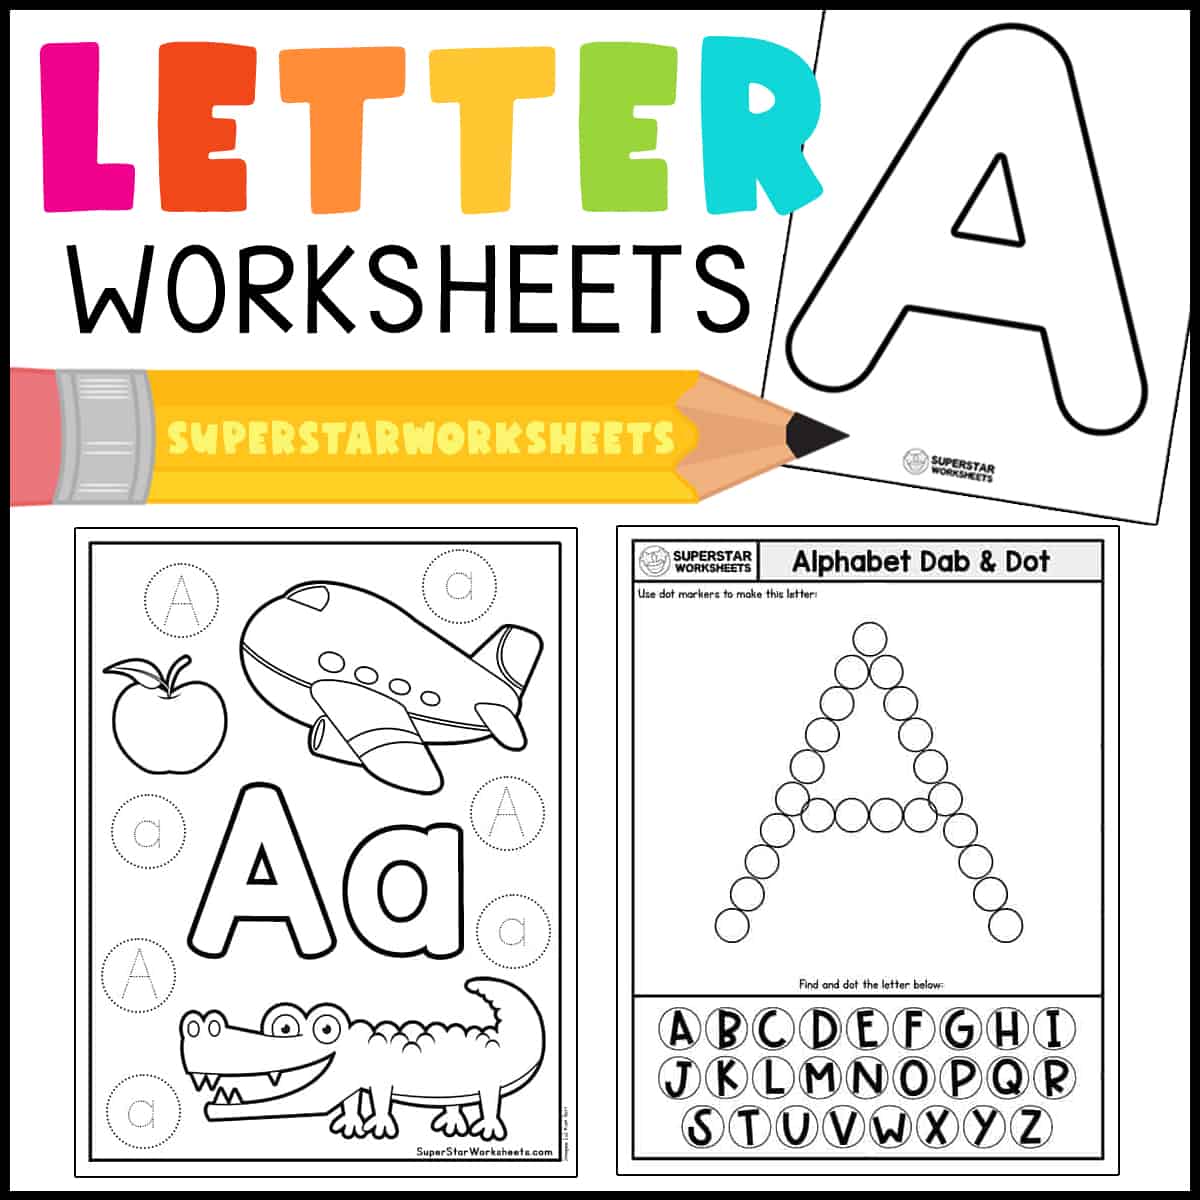 a-alphabet-worksheet-free-printable-alphabet-worksheets-help-your-kids-learn-to-recognize-and